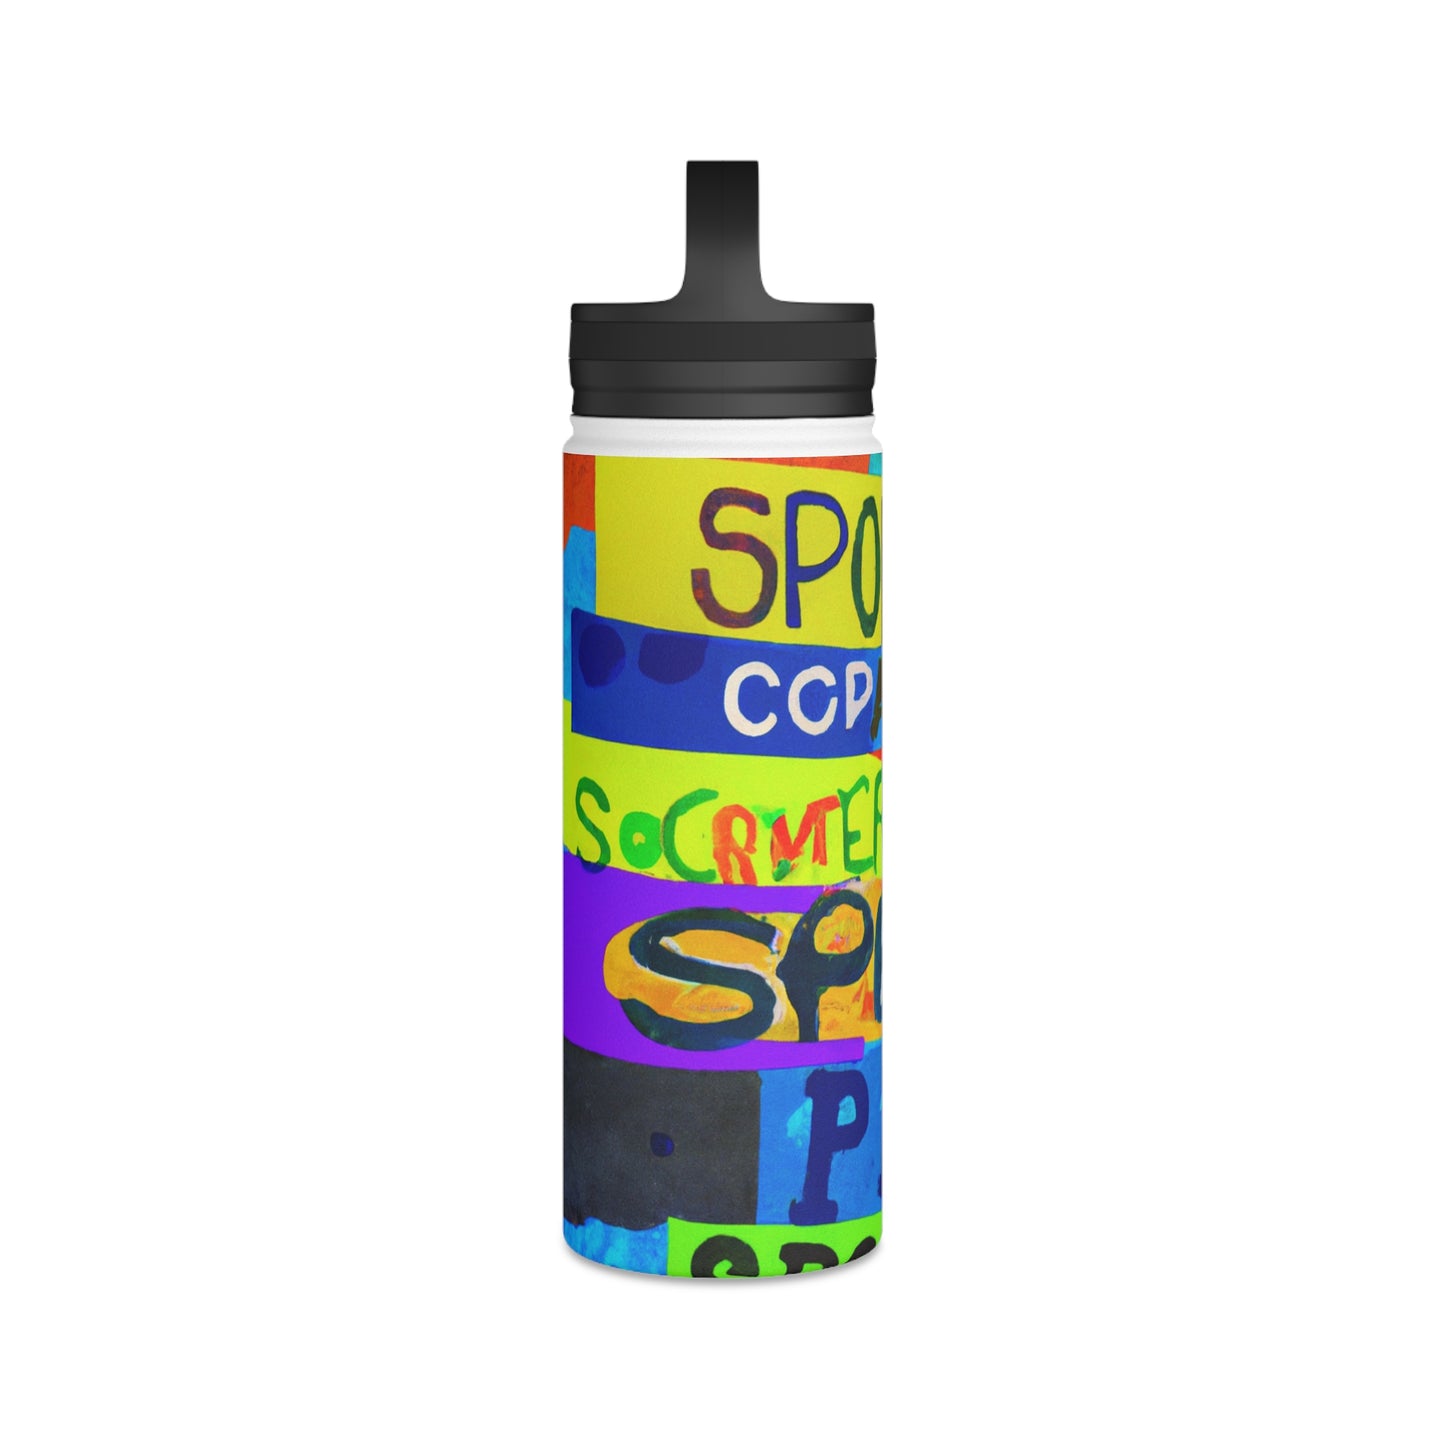 "Teamwork in Color: A Sports-Themed Mixed-Media Artwork" - Go Plus Stainless Steel Water Bottle, Handle Lid